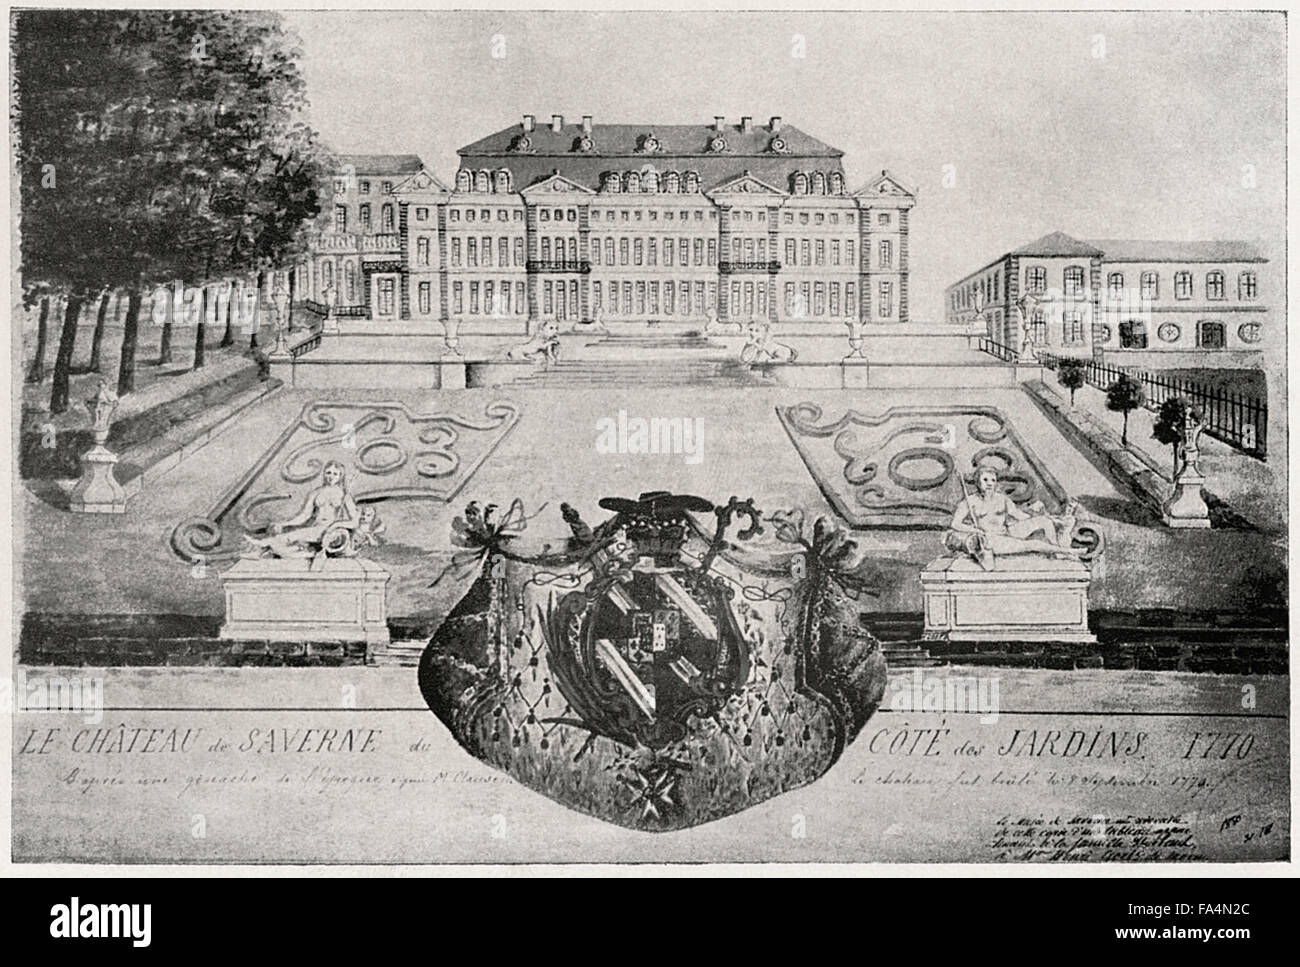 Le Chateau de Saverne, Rohan Castle, Alsace, France, built 1780-90, architect Nicolas Salins de Montfort, from a rare French print, courtesy of L’Alsace Illustree, Cote des Jardins, 1770, Book Illustration from “Cagliostro, The Splendour and Misery of A Master of Magic”, Chapman and Hall LTD, W.R.H. Trowbridge, 1910 Stock Photo